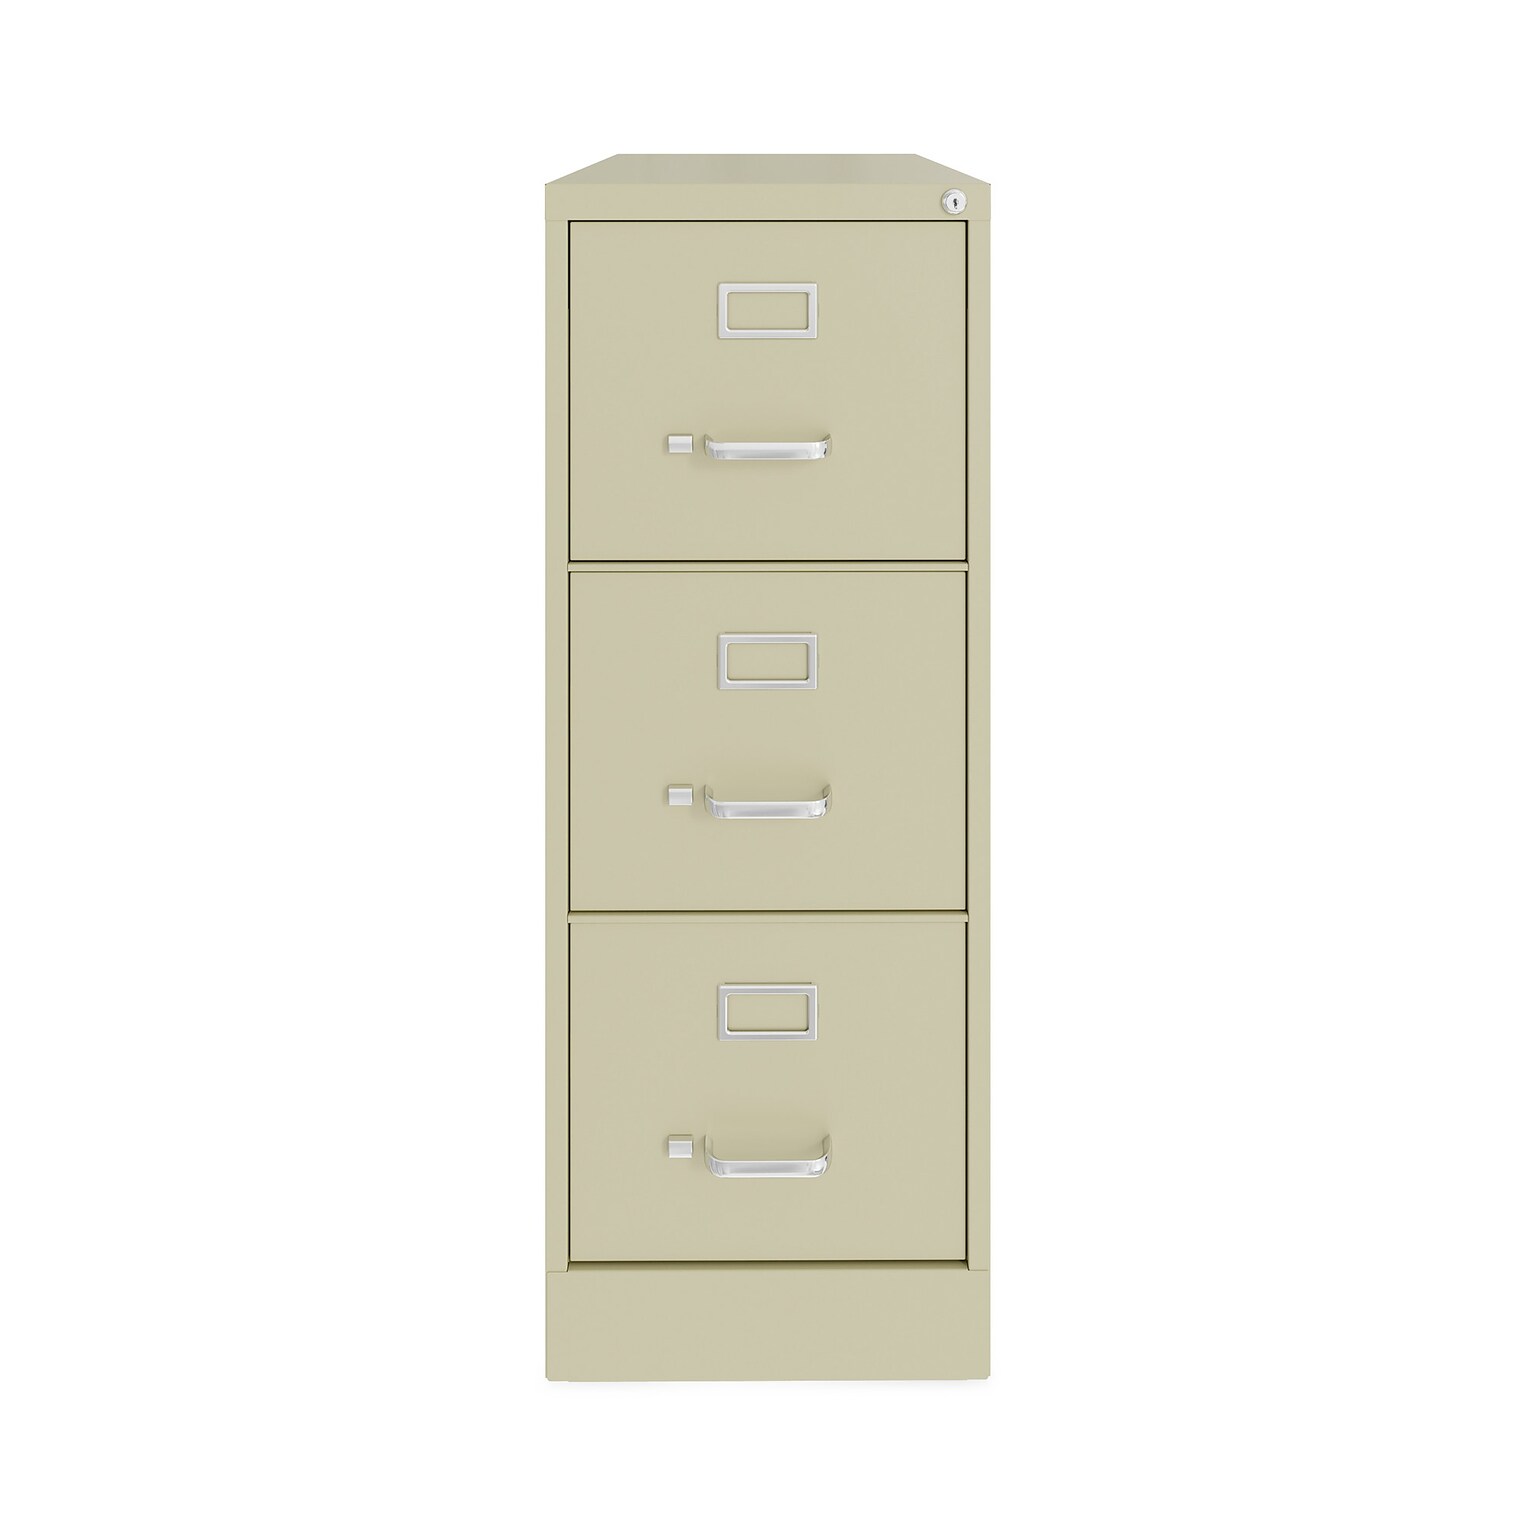 Hirsh Industries® Vertical Letter File Cabinet, 3 Letter-Size File Drawers, Putty, 15 x 22 x 40.19